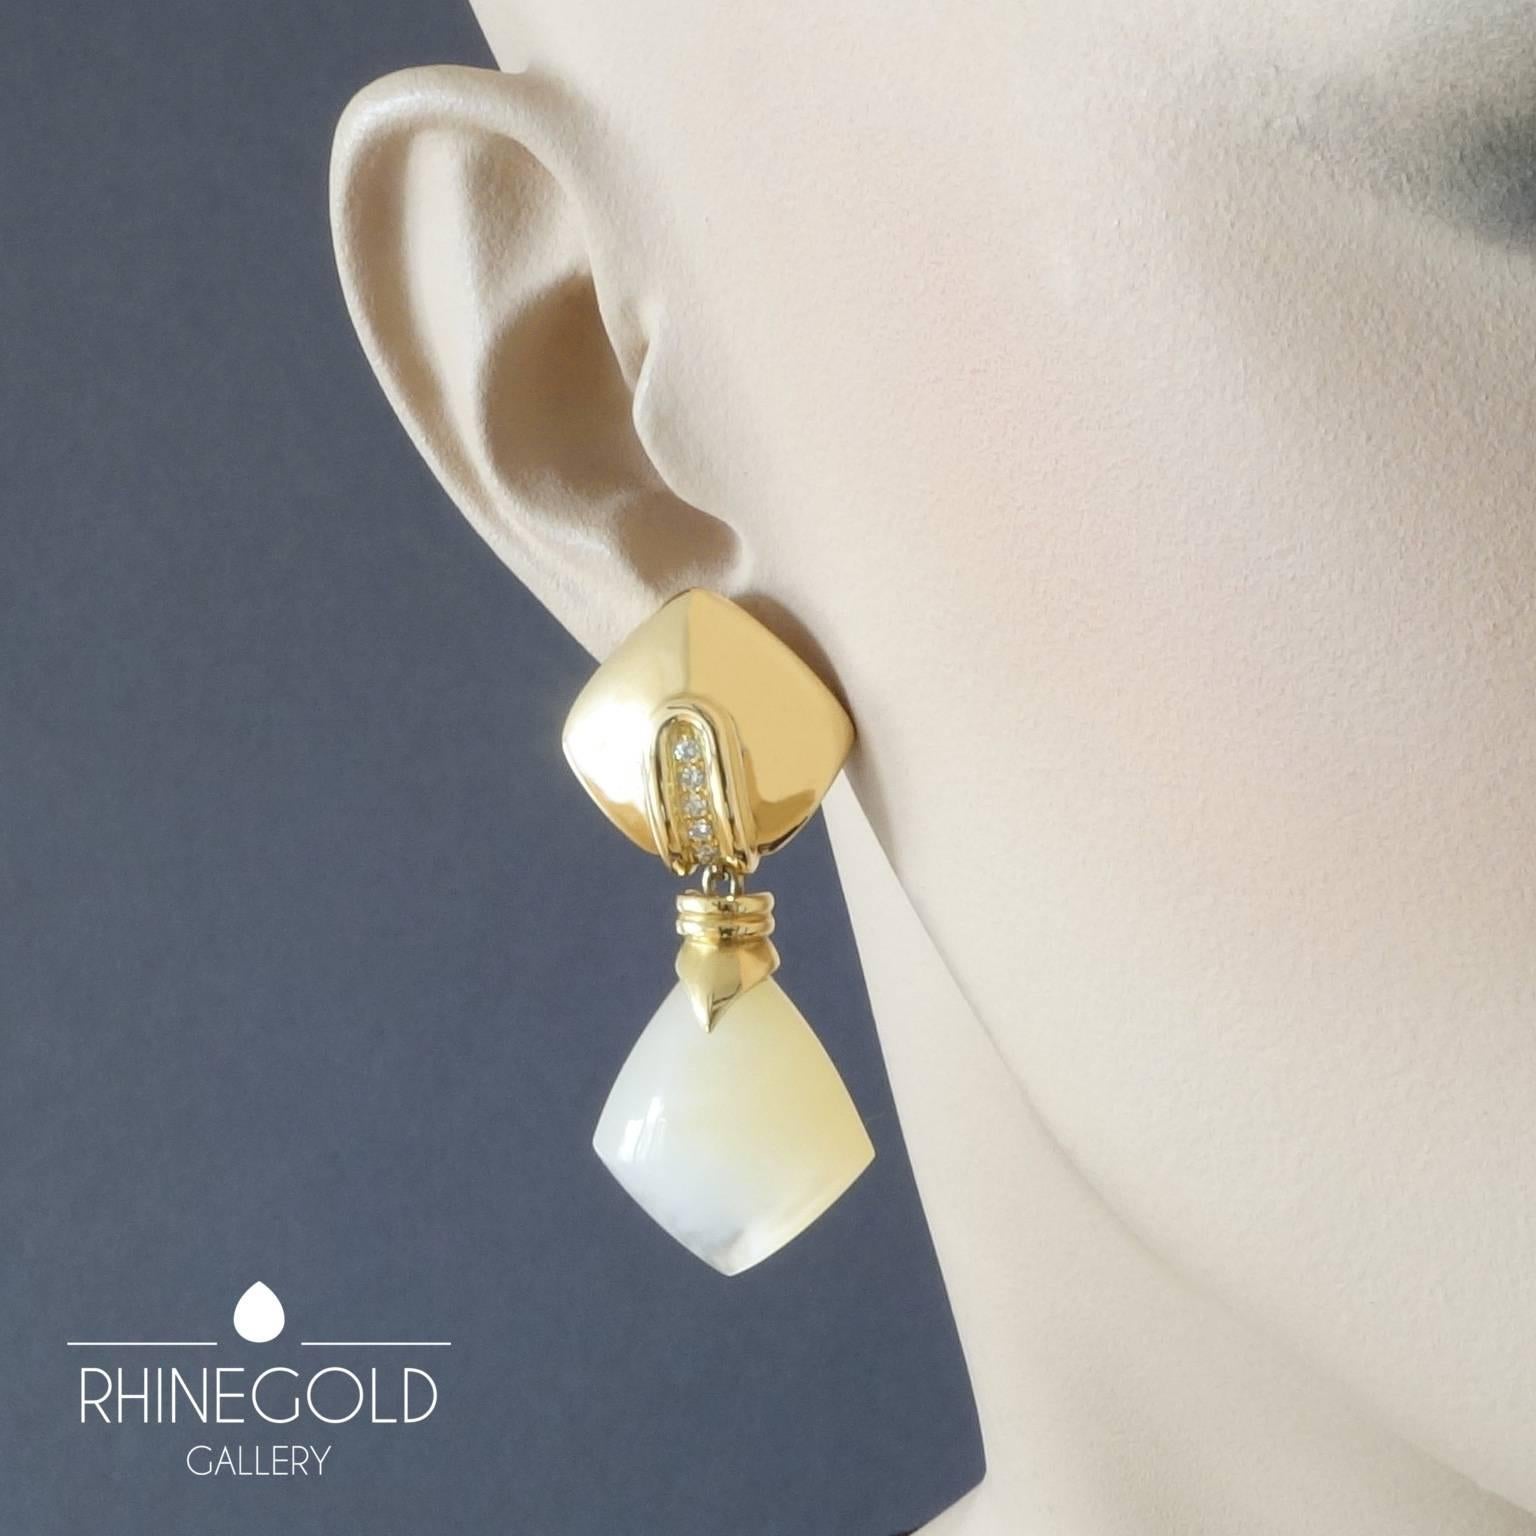 Detachable pendants carved from the finest creamy white Macassar mother-of-pearl, set in 18k gold, correlate in shape with the domed square ear studs, each set with a row of five brilliant cut diamonds (vvs). The earrings can also be worn with other